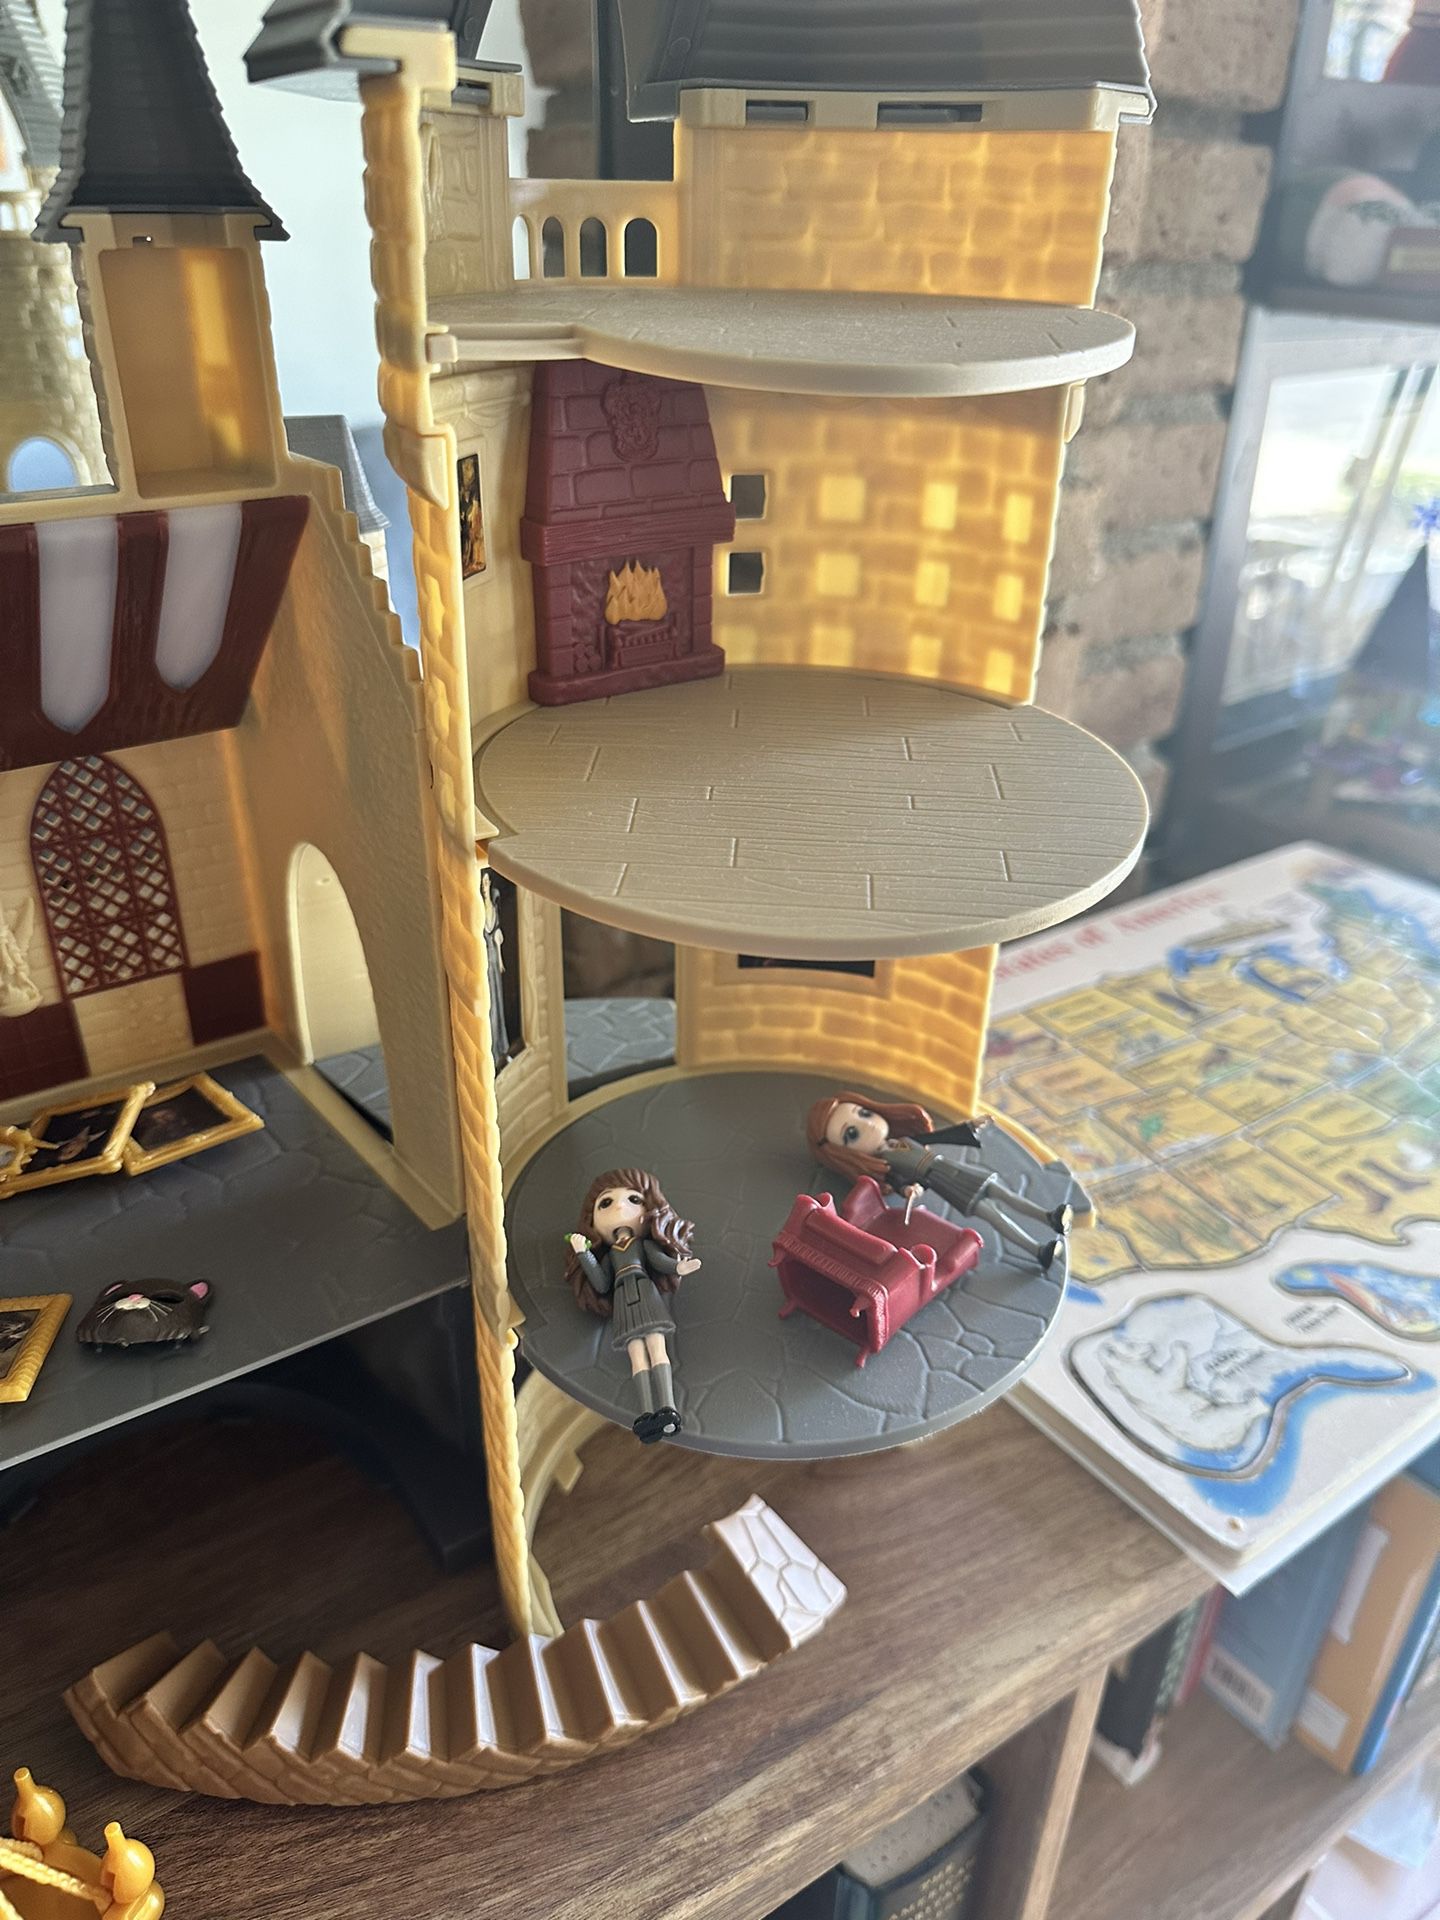 This doll house makes me think of the Shrieking shack from harry potter  with better furnishings or a hau…